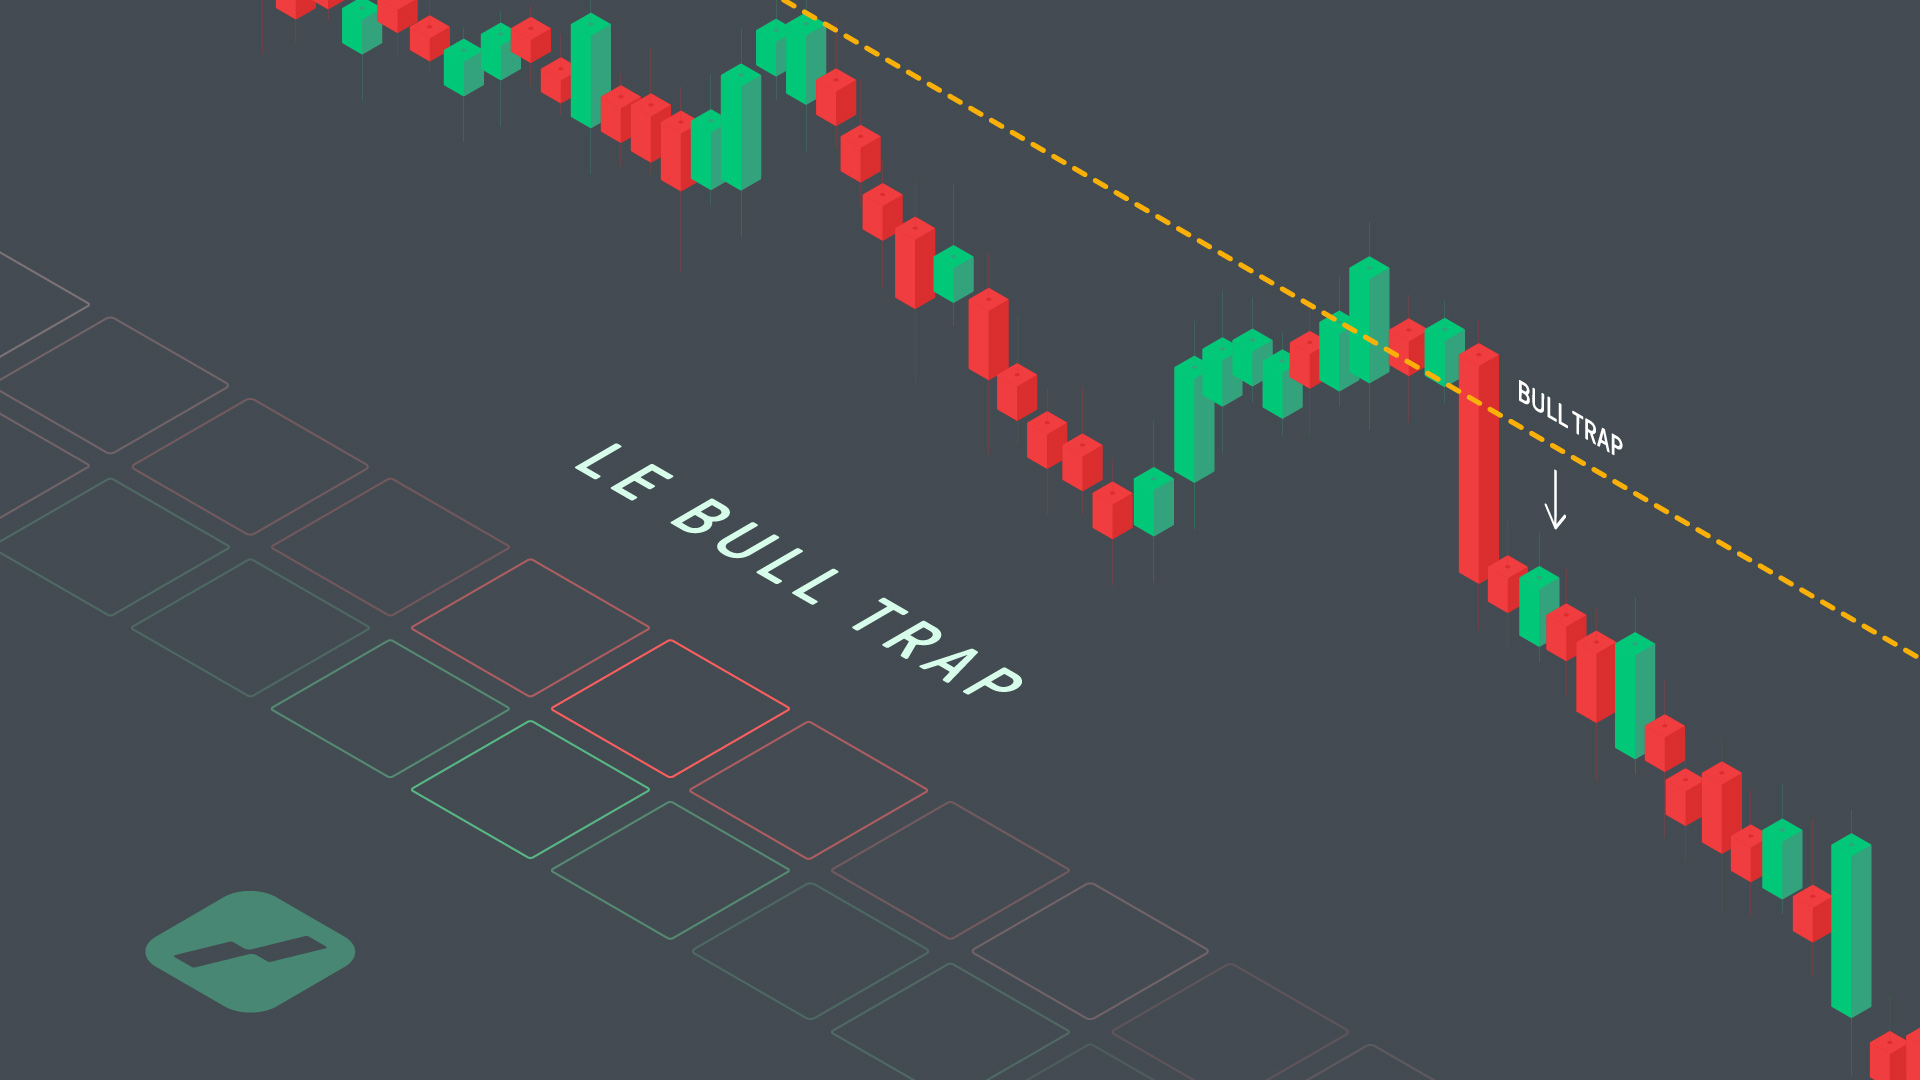 bull trap - bull trap trading - featured image